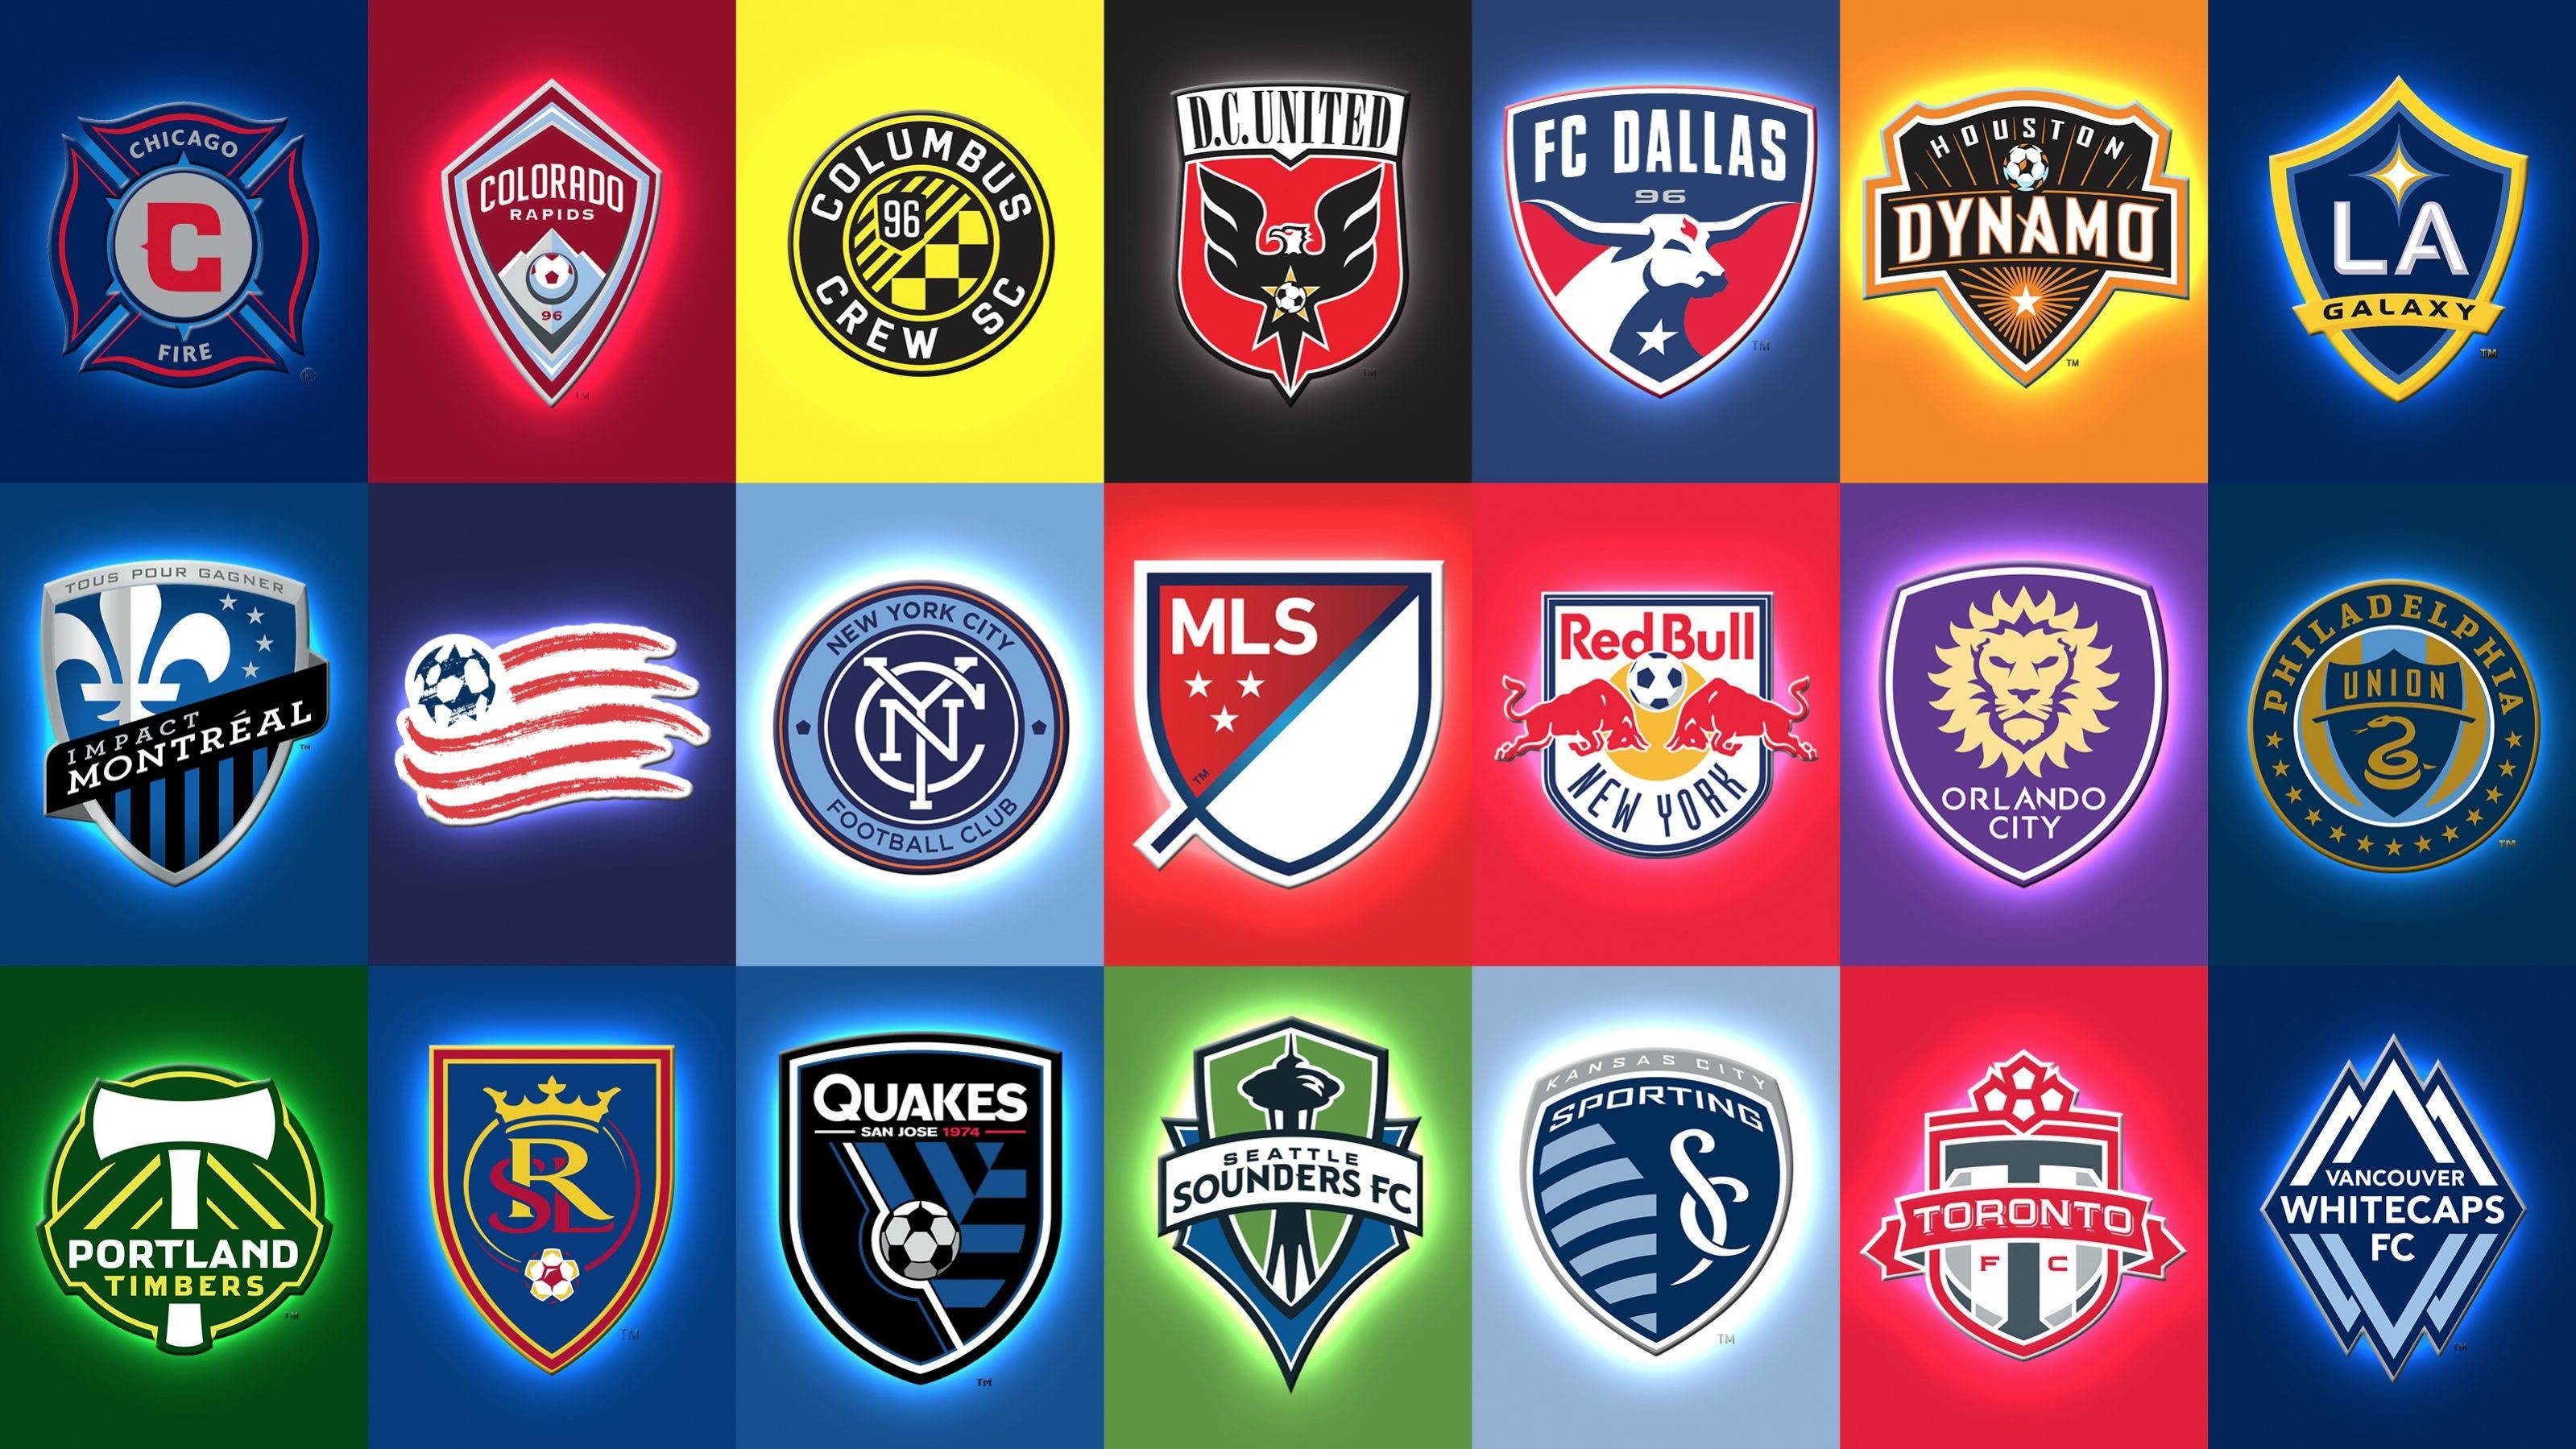 3198x1799 I made an MLS wallpaper because I'm snowed in. You can use it if you want.